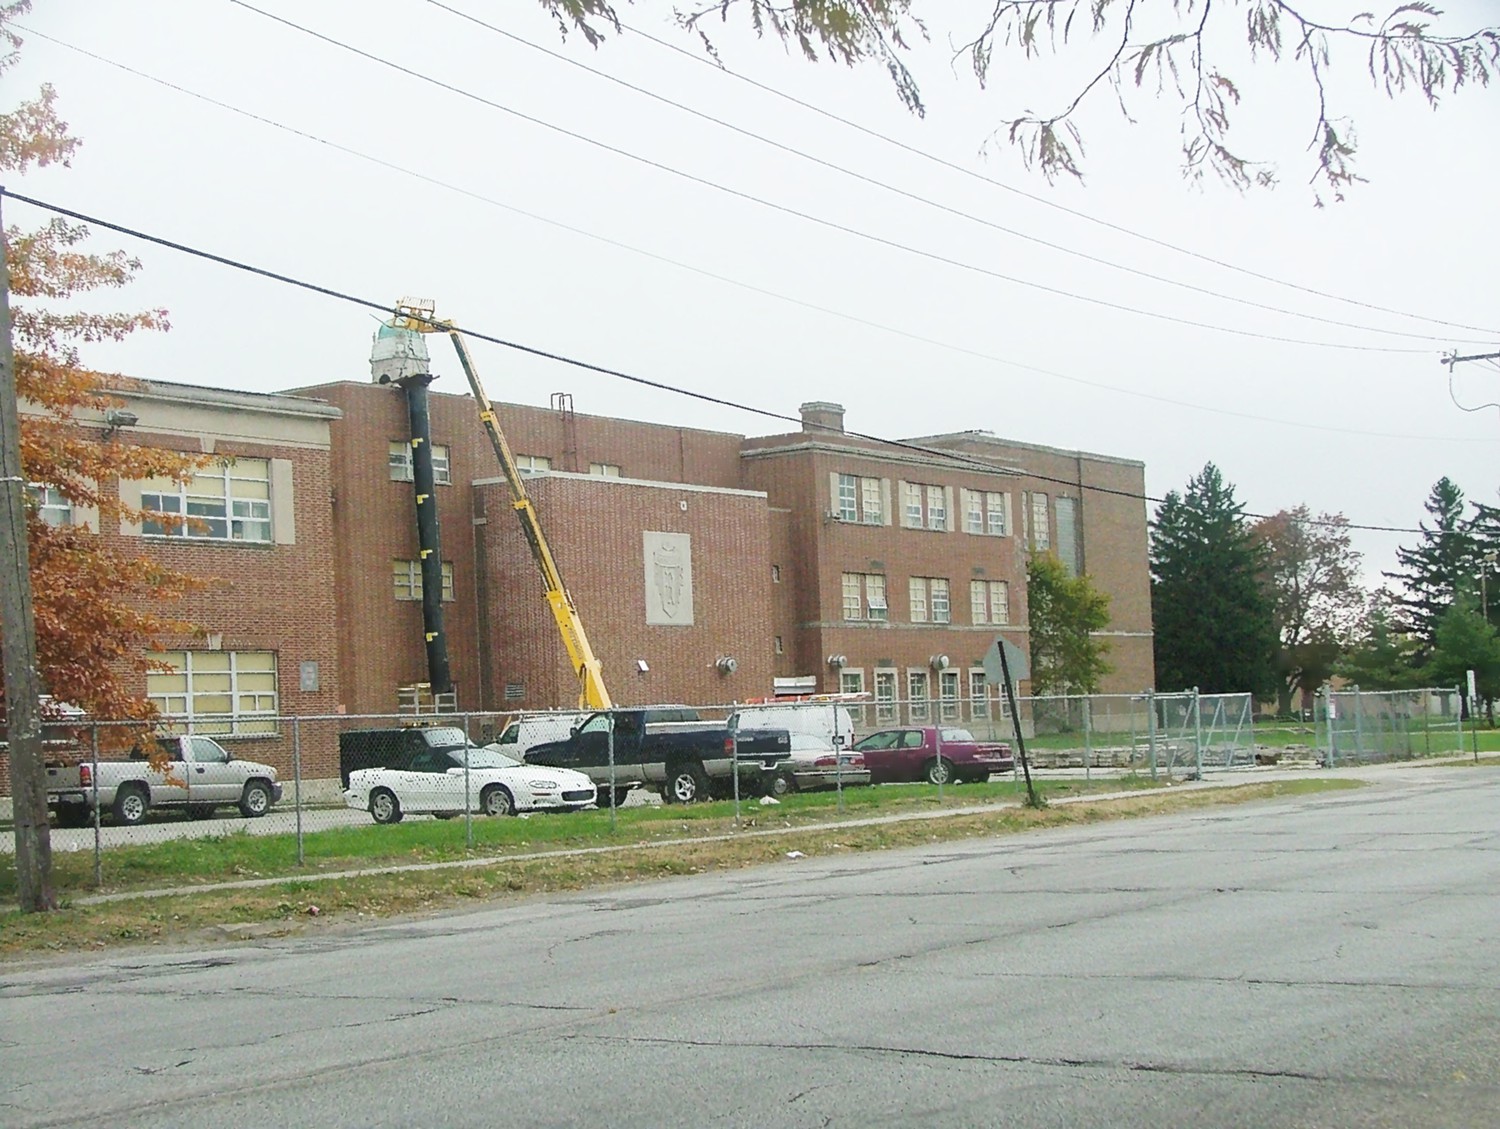 Theodore Roosevelt High School, Gary Indiana West elevation of 1946/1968 additions. Camera facing south (2010)